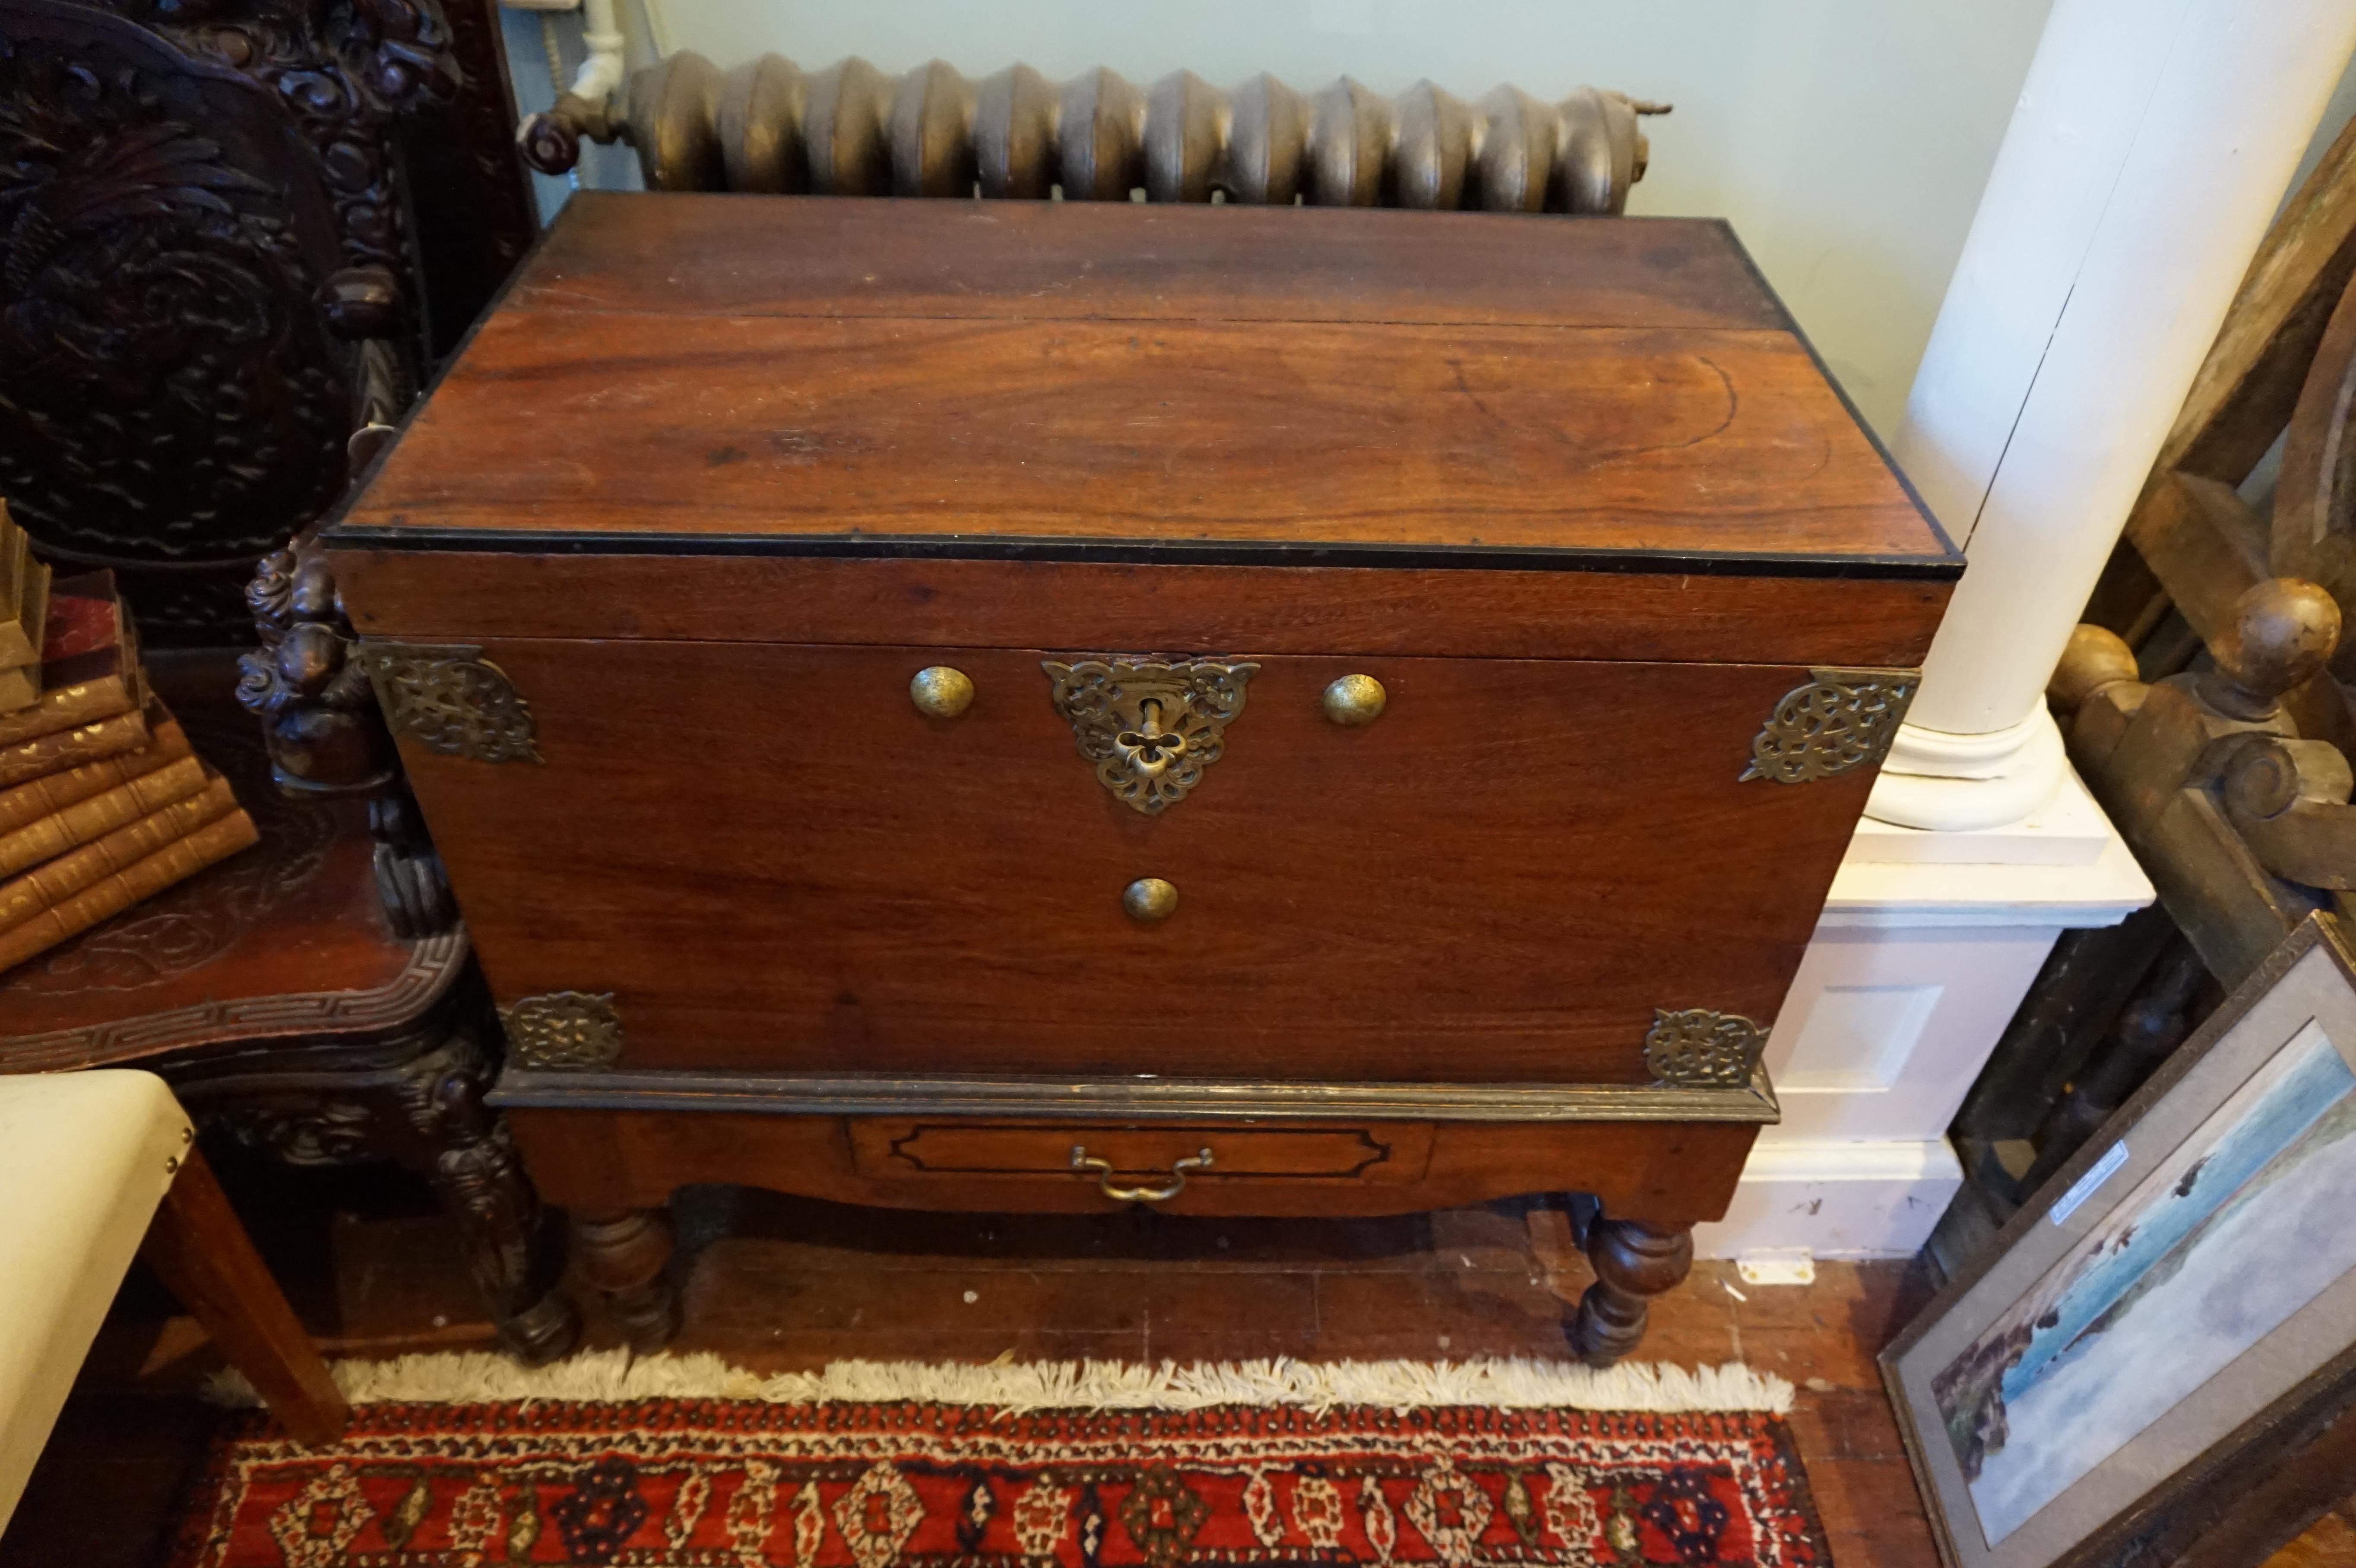 Dutch Colonial mahogany chest.
Fine Dutch Colonial chest with original brass work and surviving key. Peg work joinery, vase turned feet and drawer at base. Solid and sturdy construction exuding warmth and character,
circa 1880s
Origin: Ceylon.